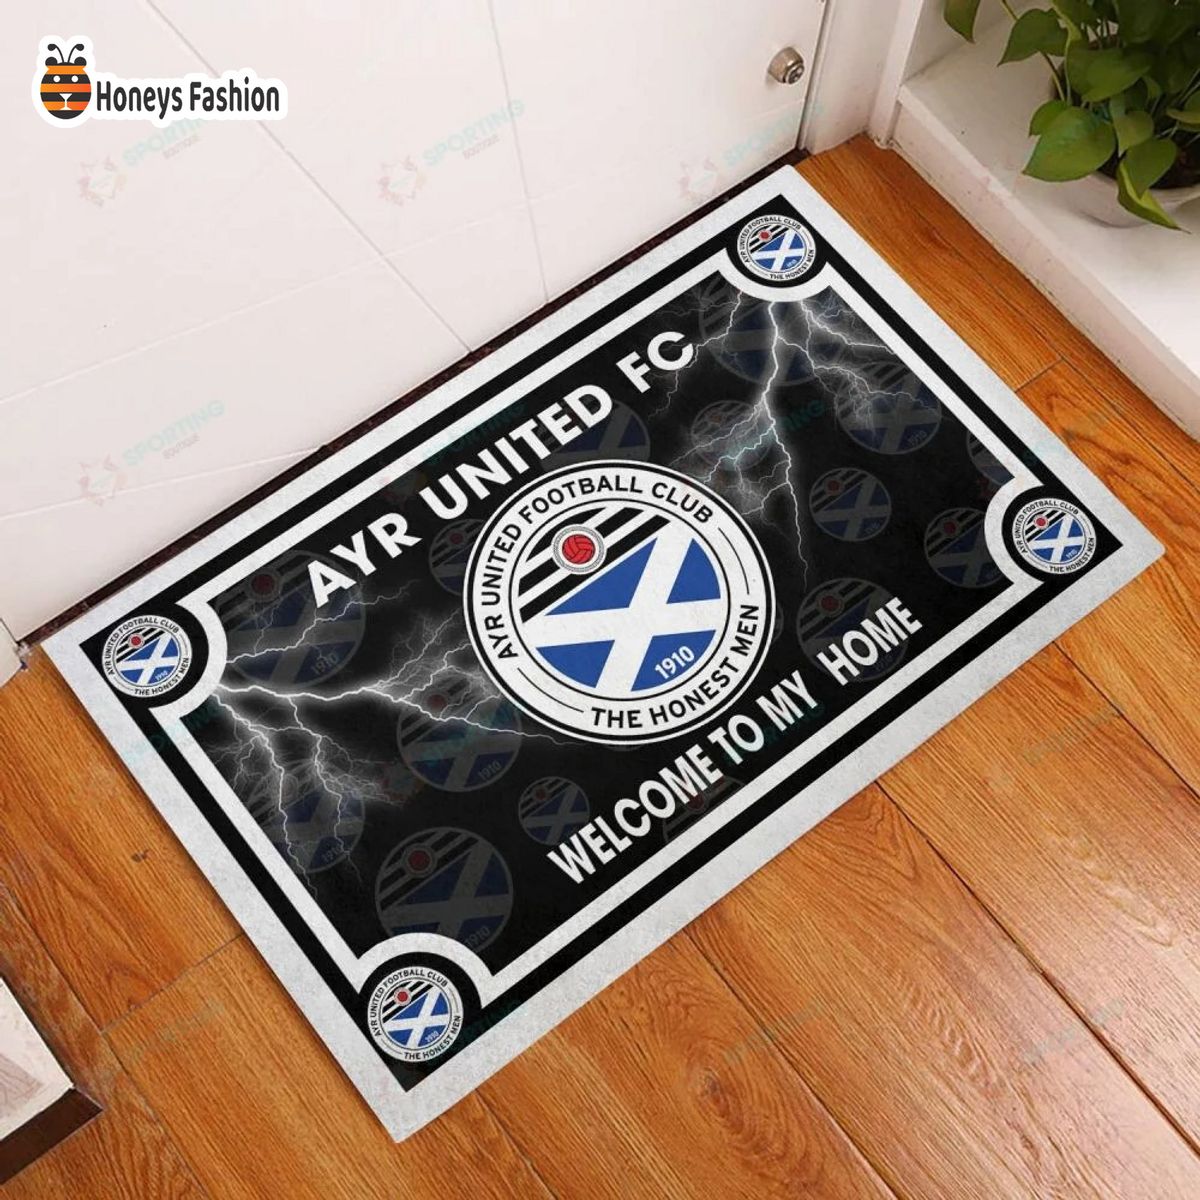 Ayr United F.C. welcome to my home doormat